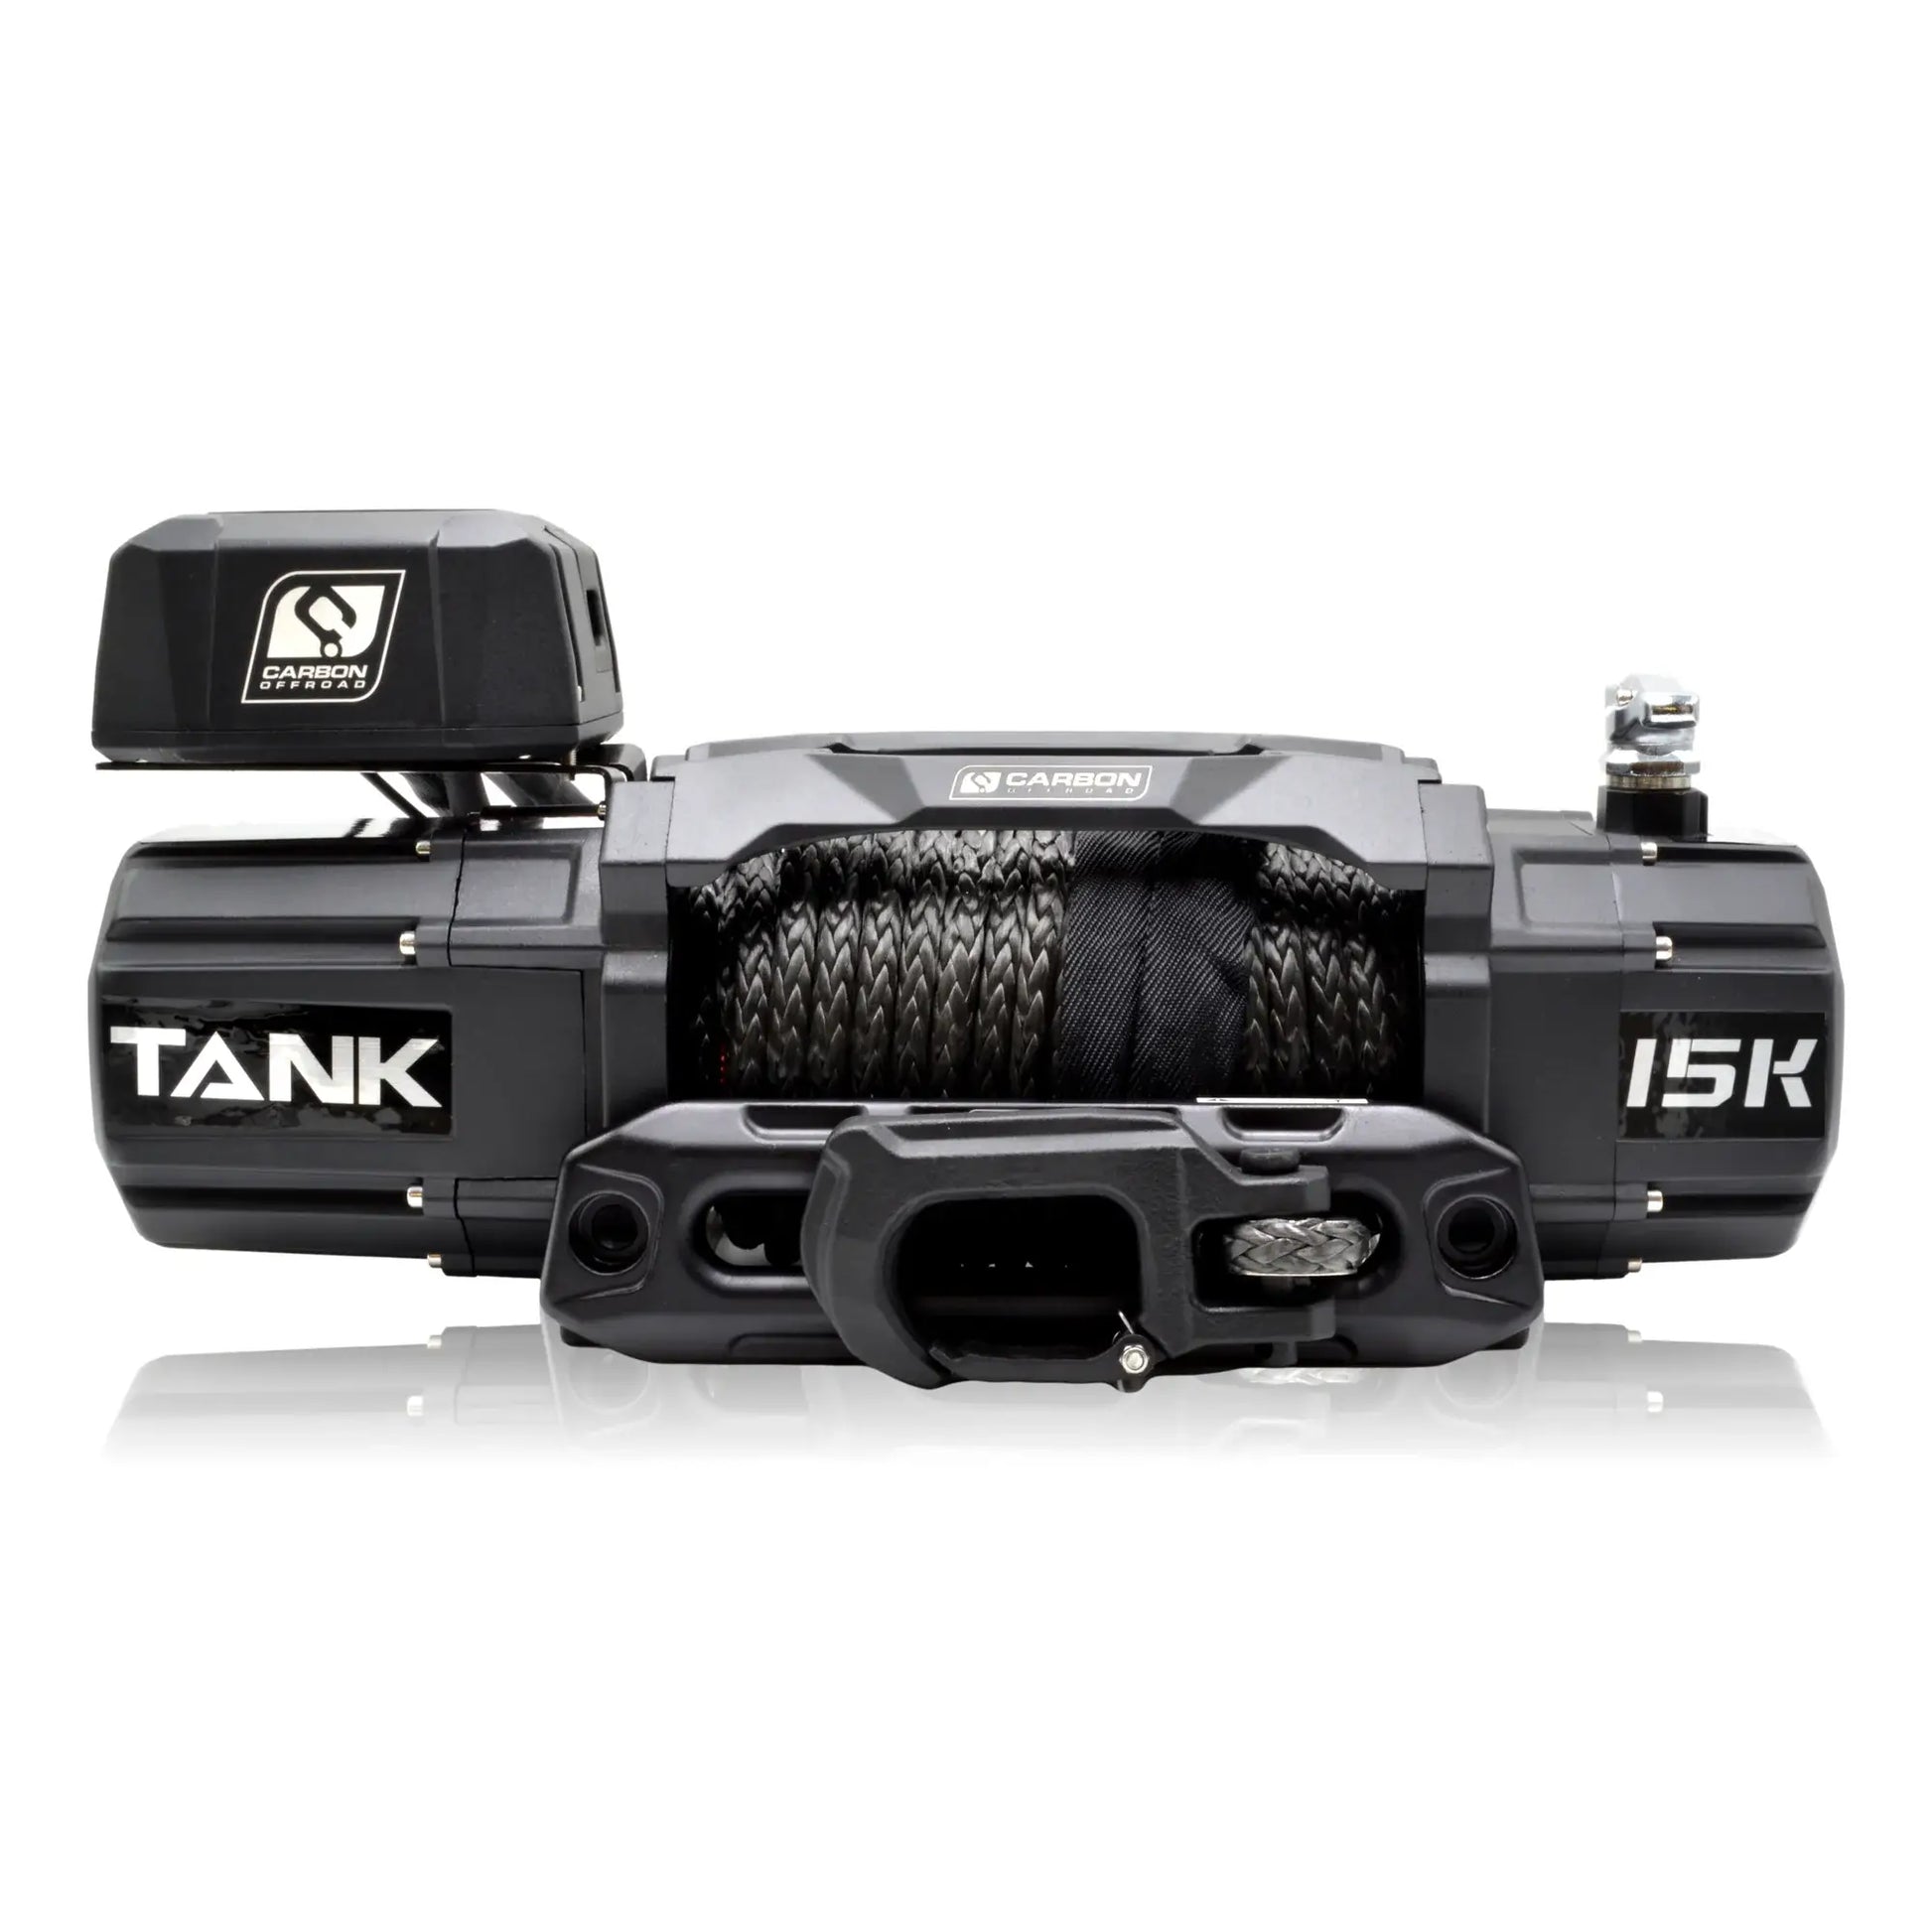 Carbon Tank 15000lb 4x4 Winch Kit IP68 12V and Recovery Combo Deal - CW-TK15-COMBO2 2